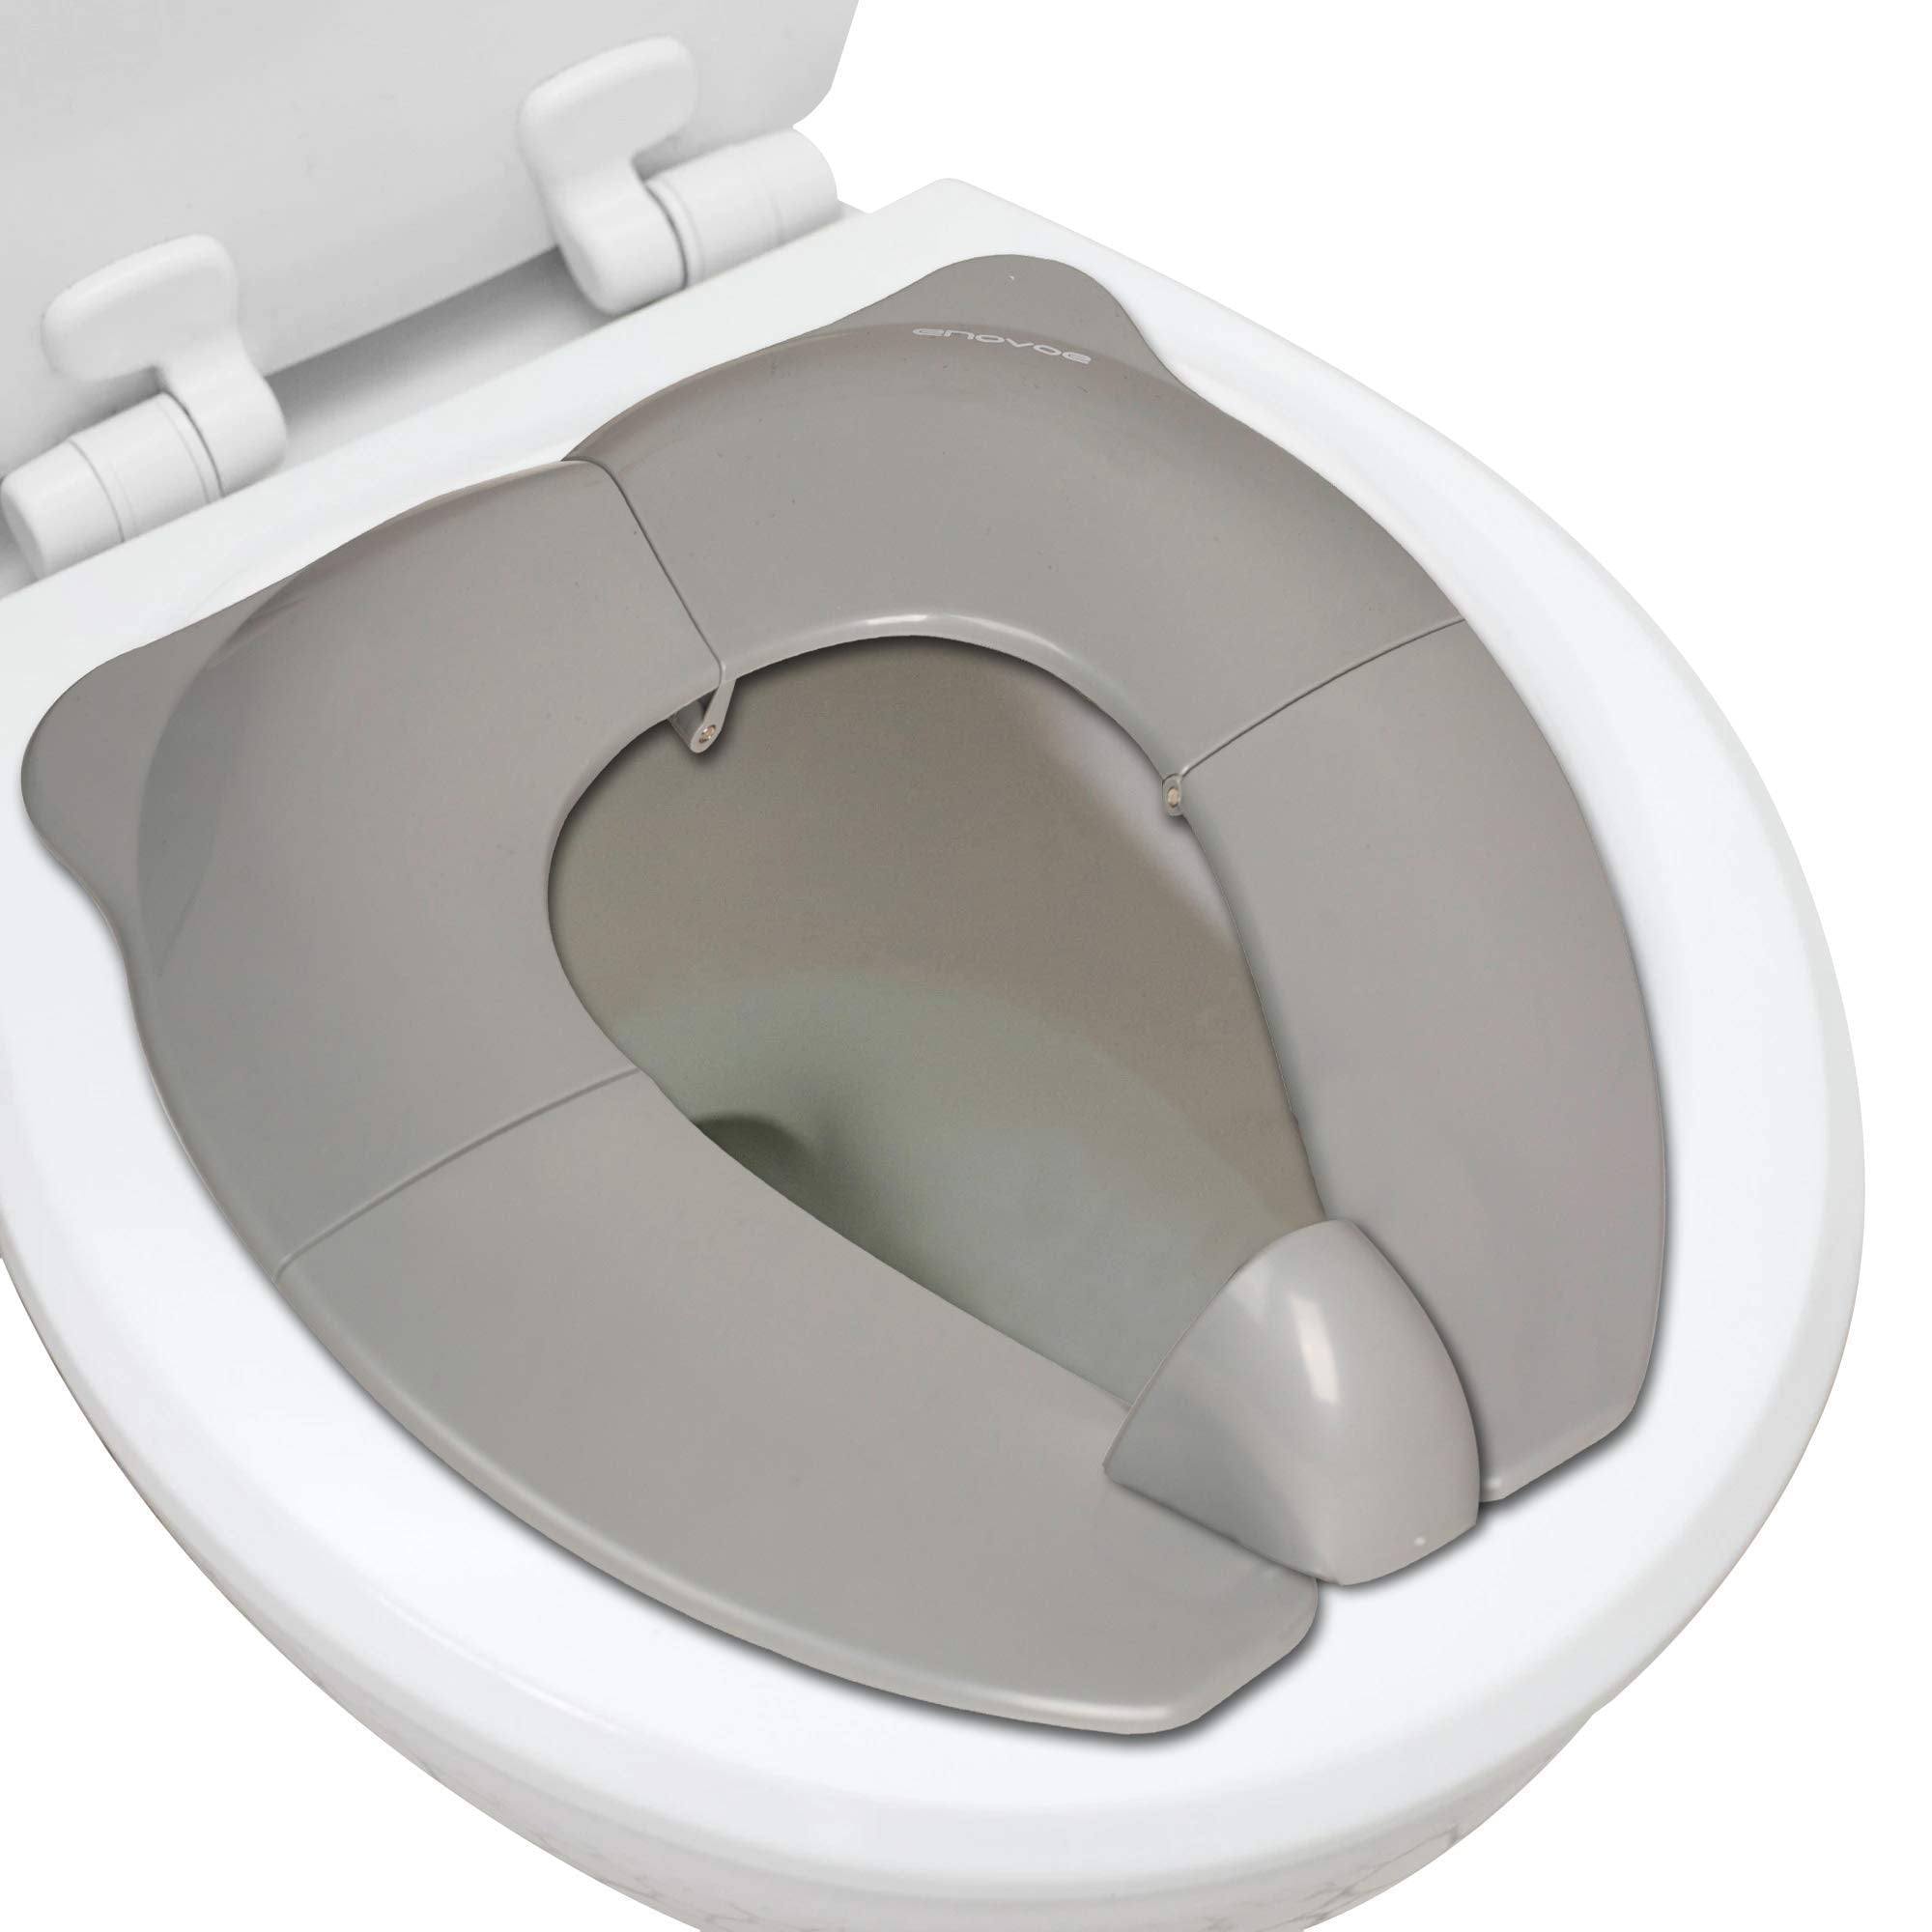 Real Feel Potty - Virtual Flushing & Cheering Sounds, Disposable Liners &  Removable Seat for Independent Use - by Jool Baby 